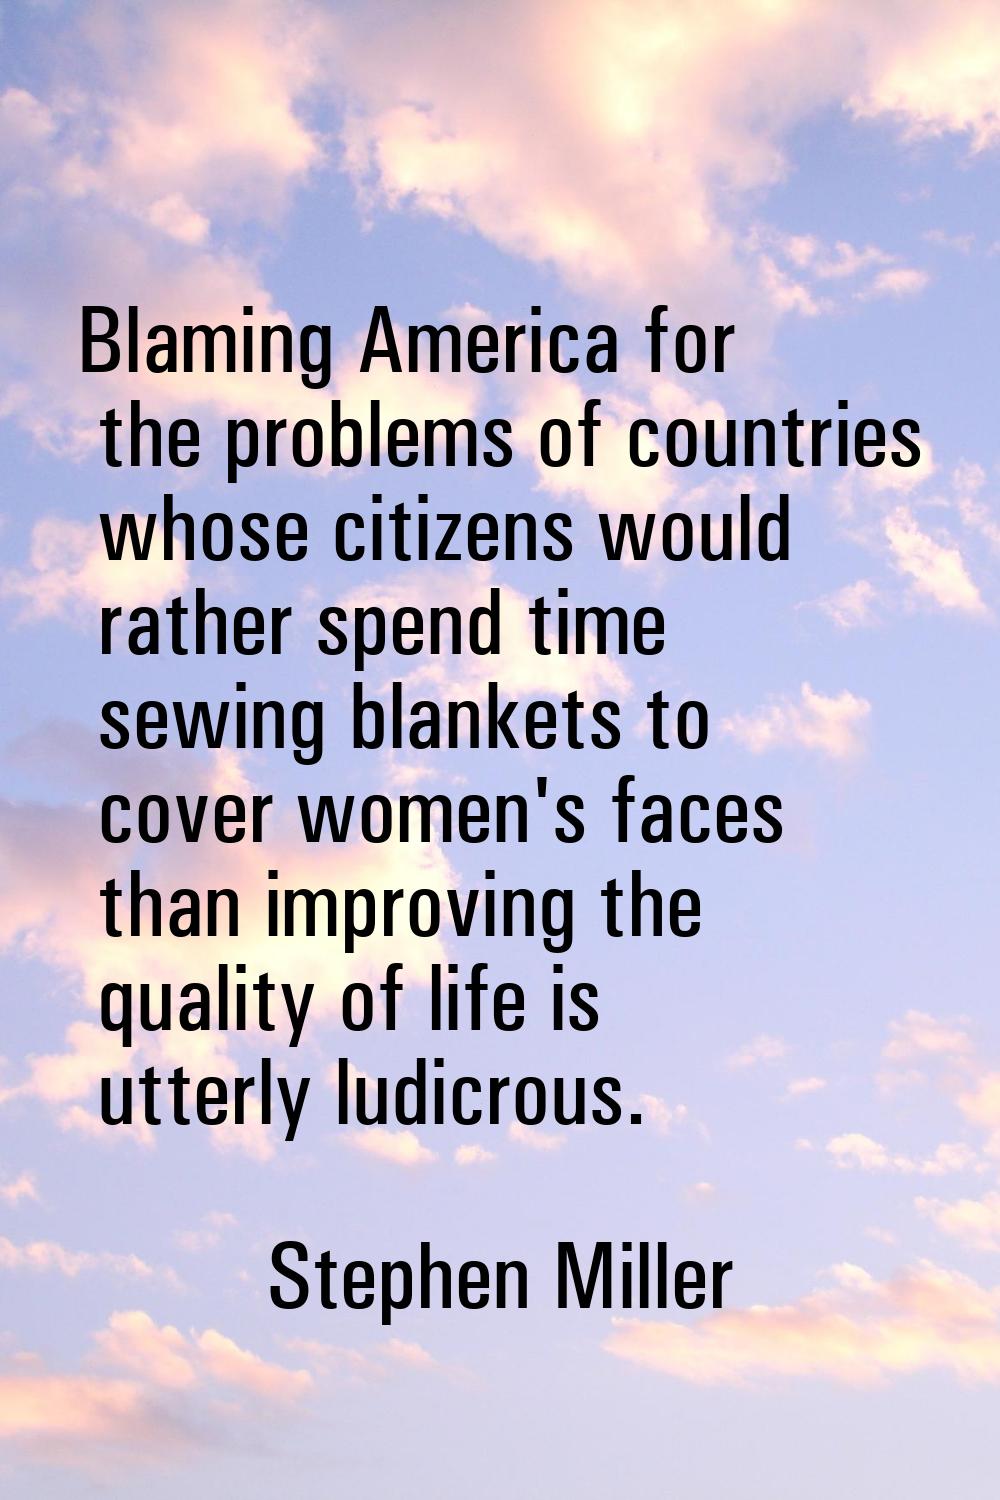 Blaming America for the problems of countries whose citizens would rather spend time sewing blanket